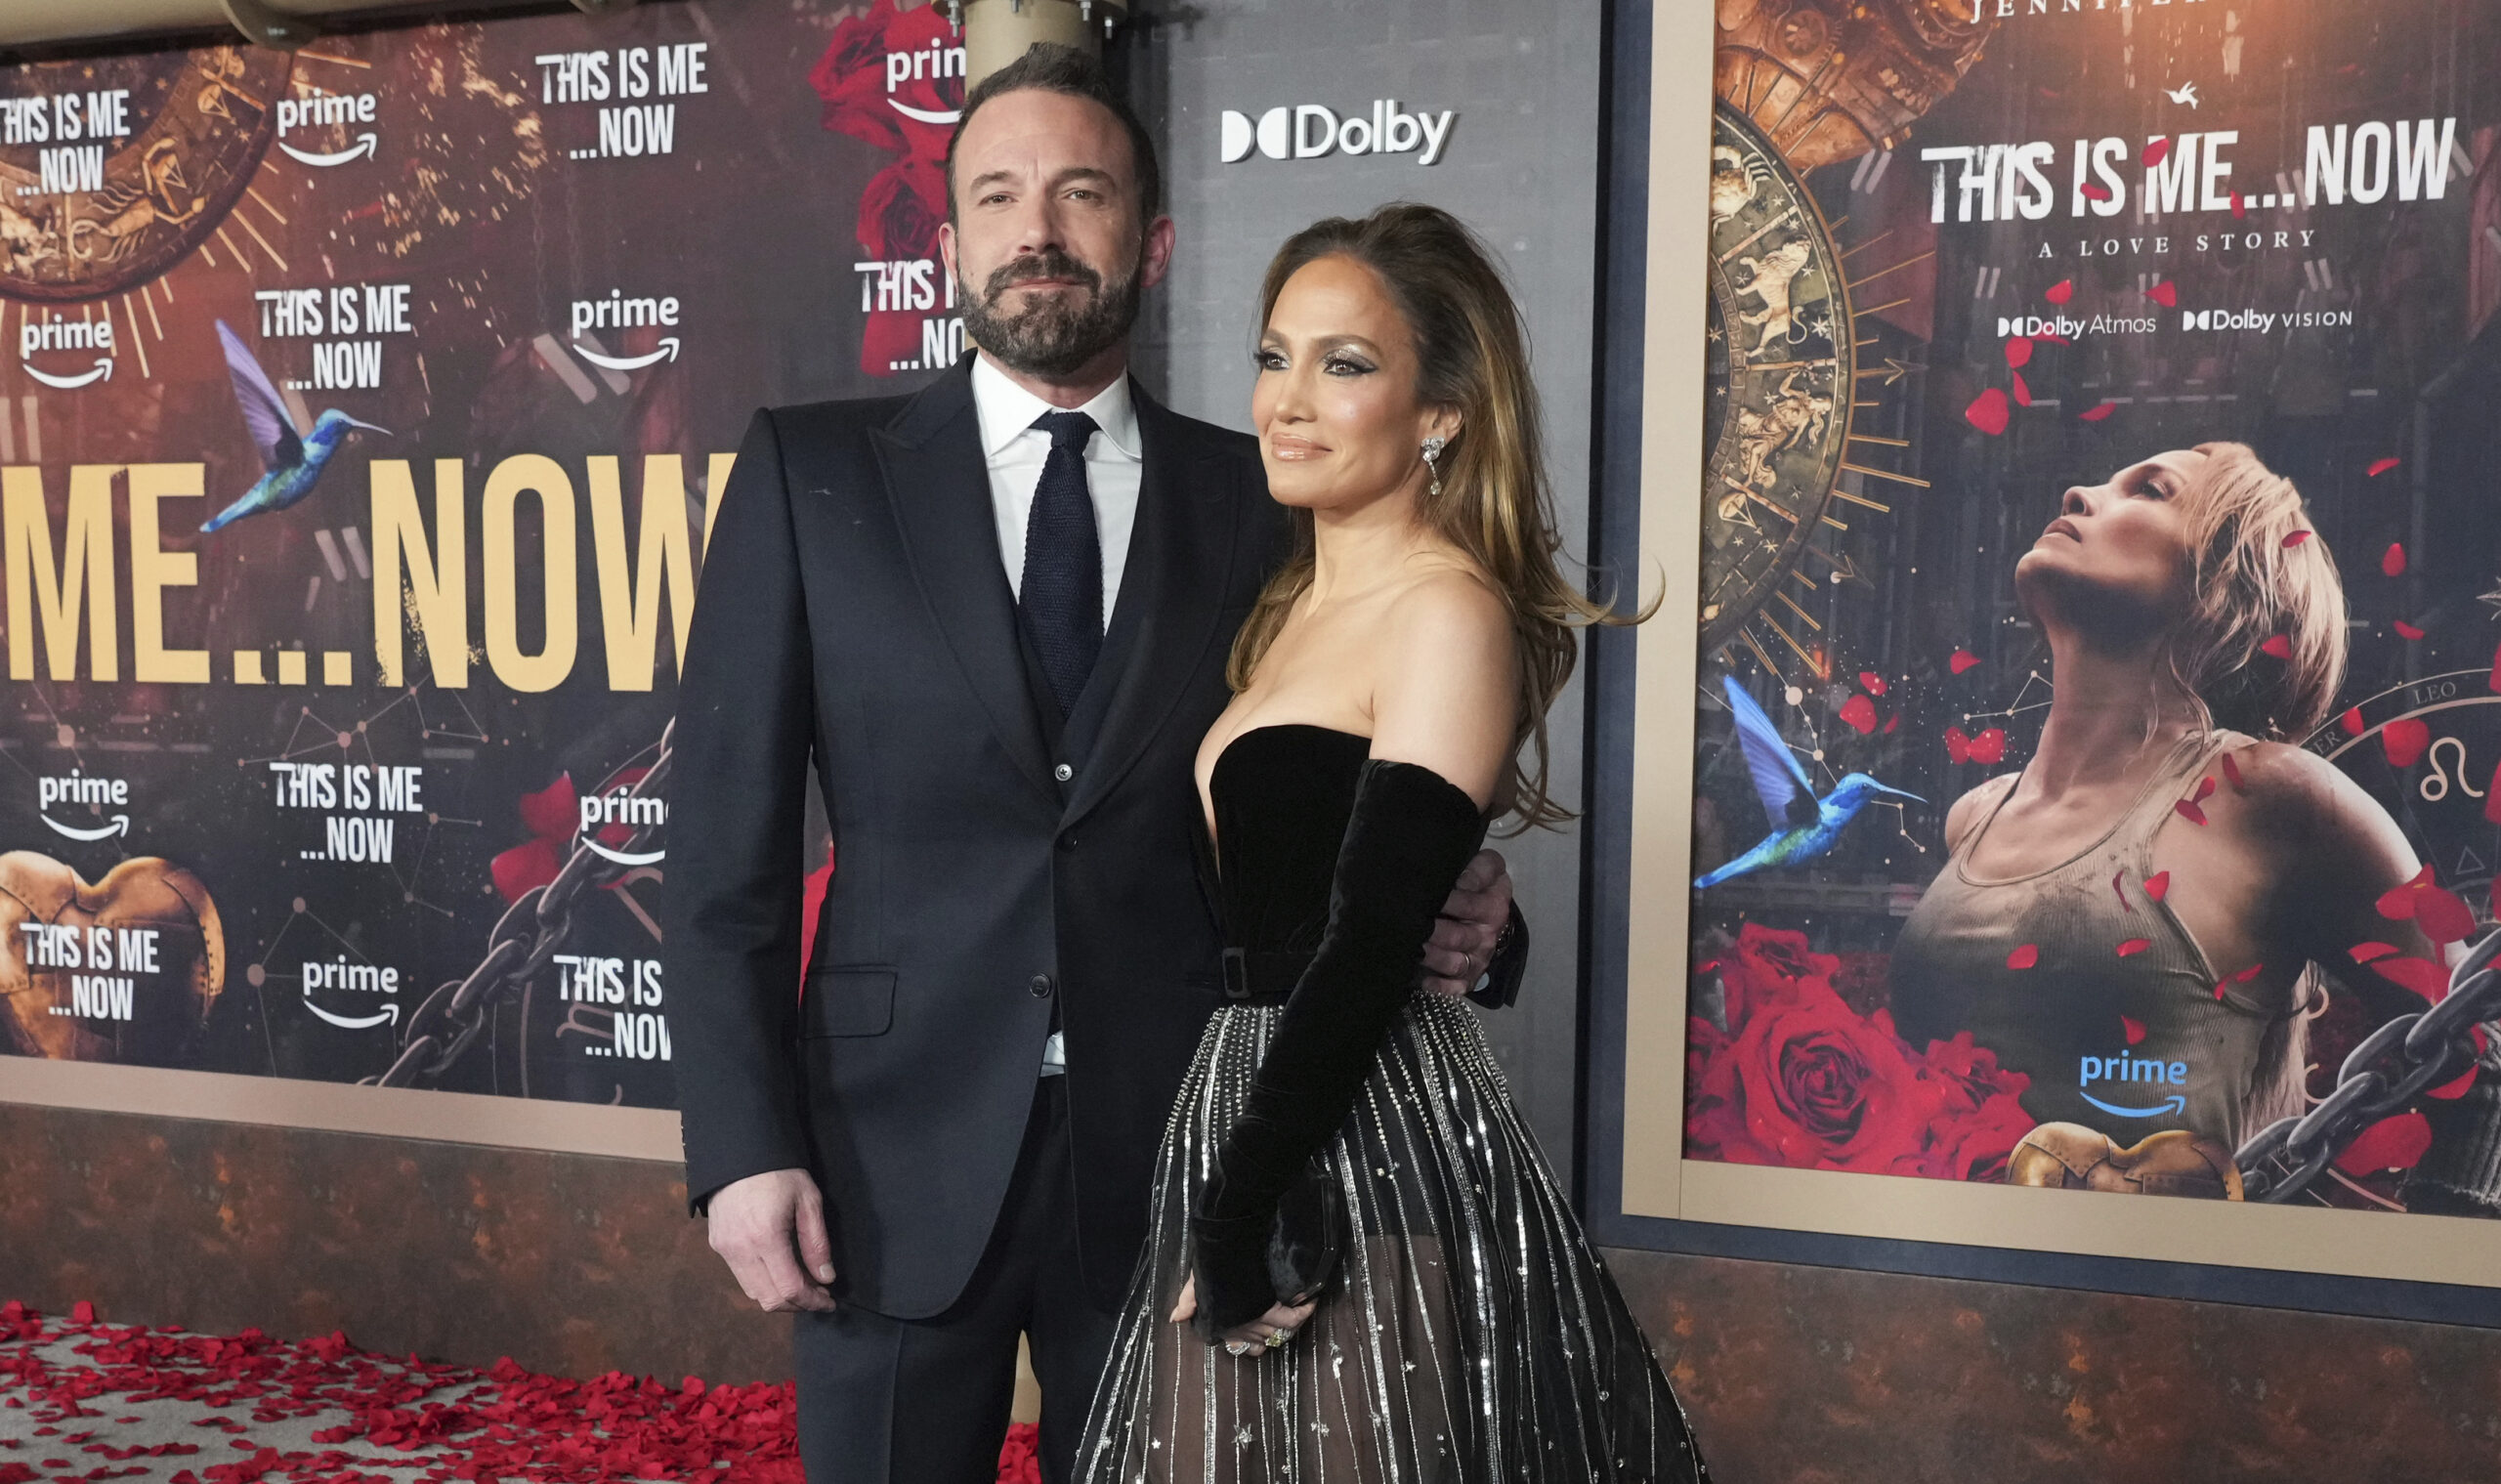 Ben Affleck, left, and Jennifer Lopez arrive at the premiere of "This Is Me... Now: A Love Story" on Tuesday, Feb. 13, 2024, at the Dolby Theatre in Los Angeles. (Photo by Jordan Strauss/Invision/AP)